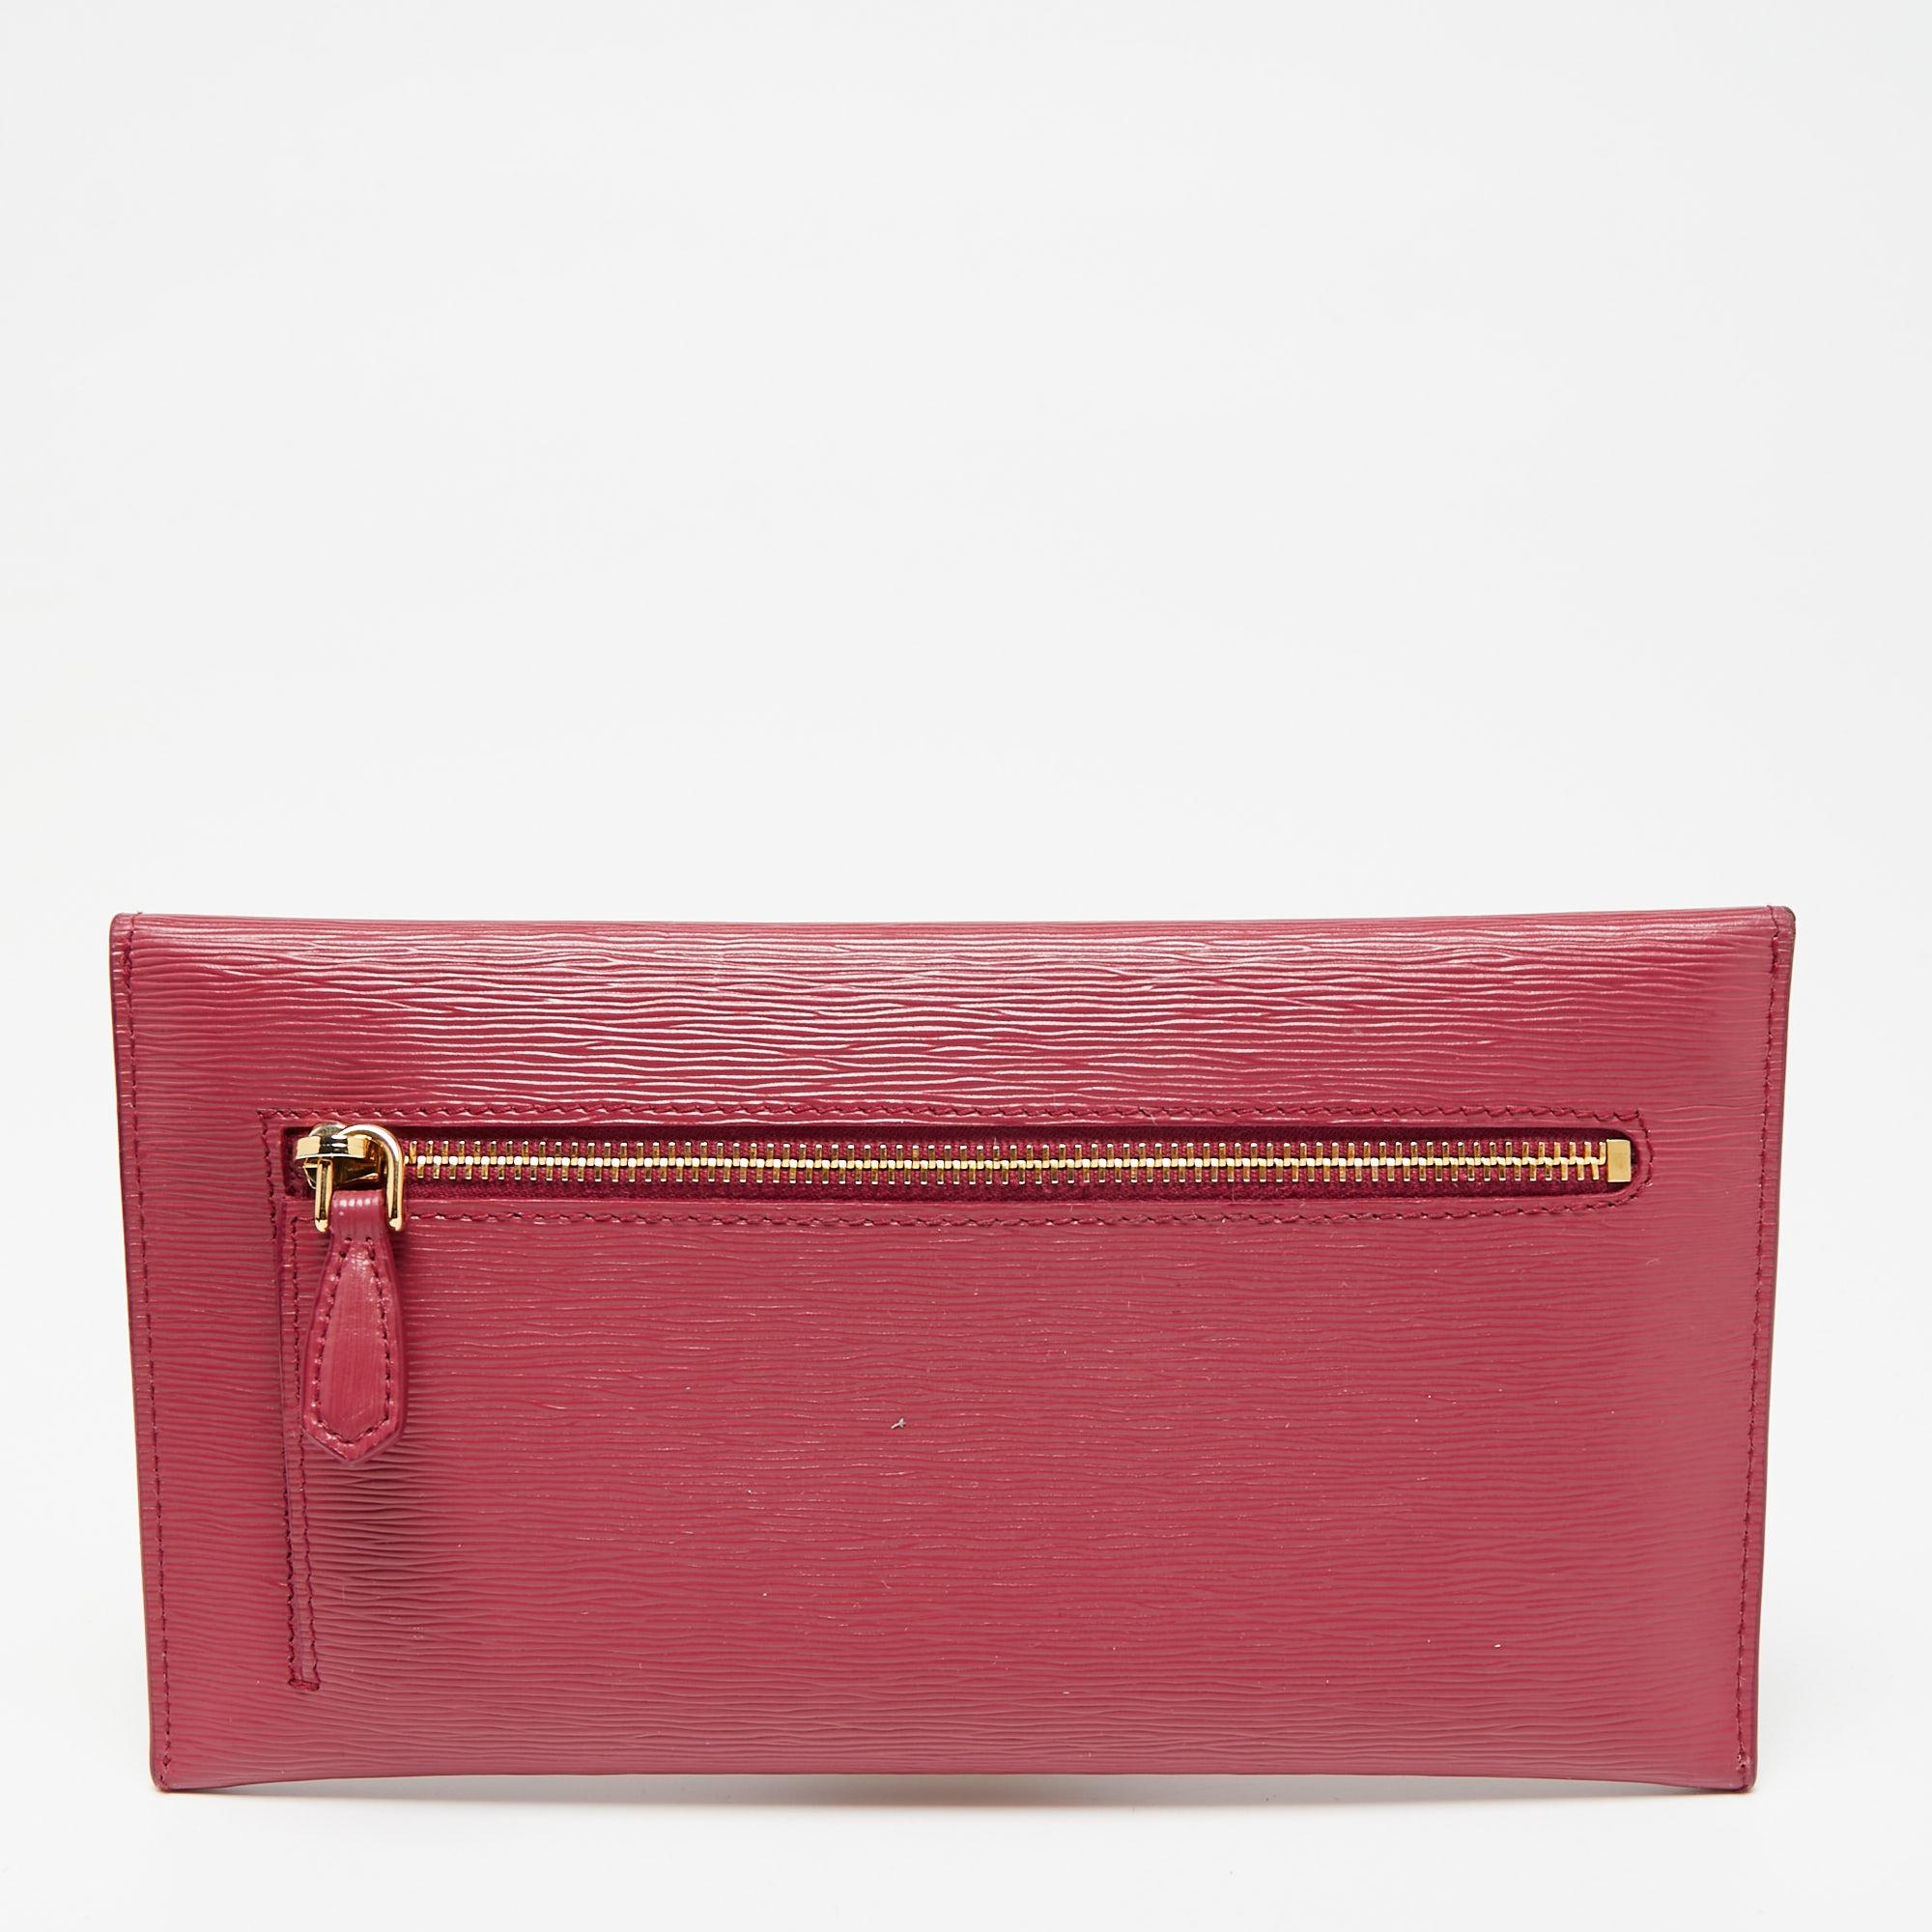 Prada's envelope wallet is equipped with card slots and enough space to neatly house essentials. It features a pink Saffiano leather body, detailed with the brand logo in gold-tone metal on the flap. The sleek style looks good hand-held and also